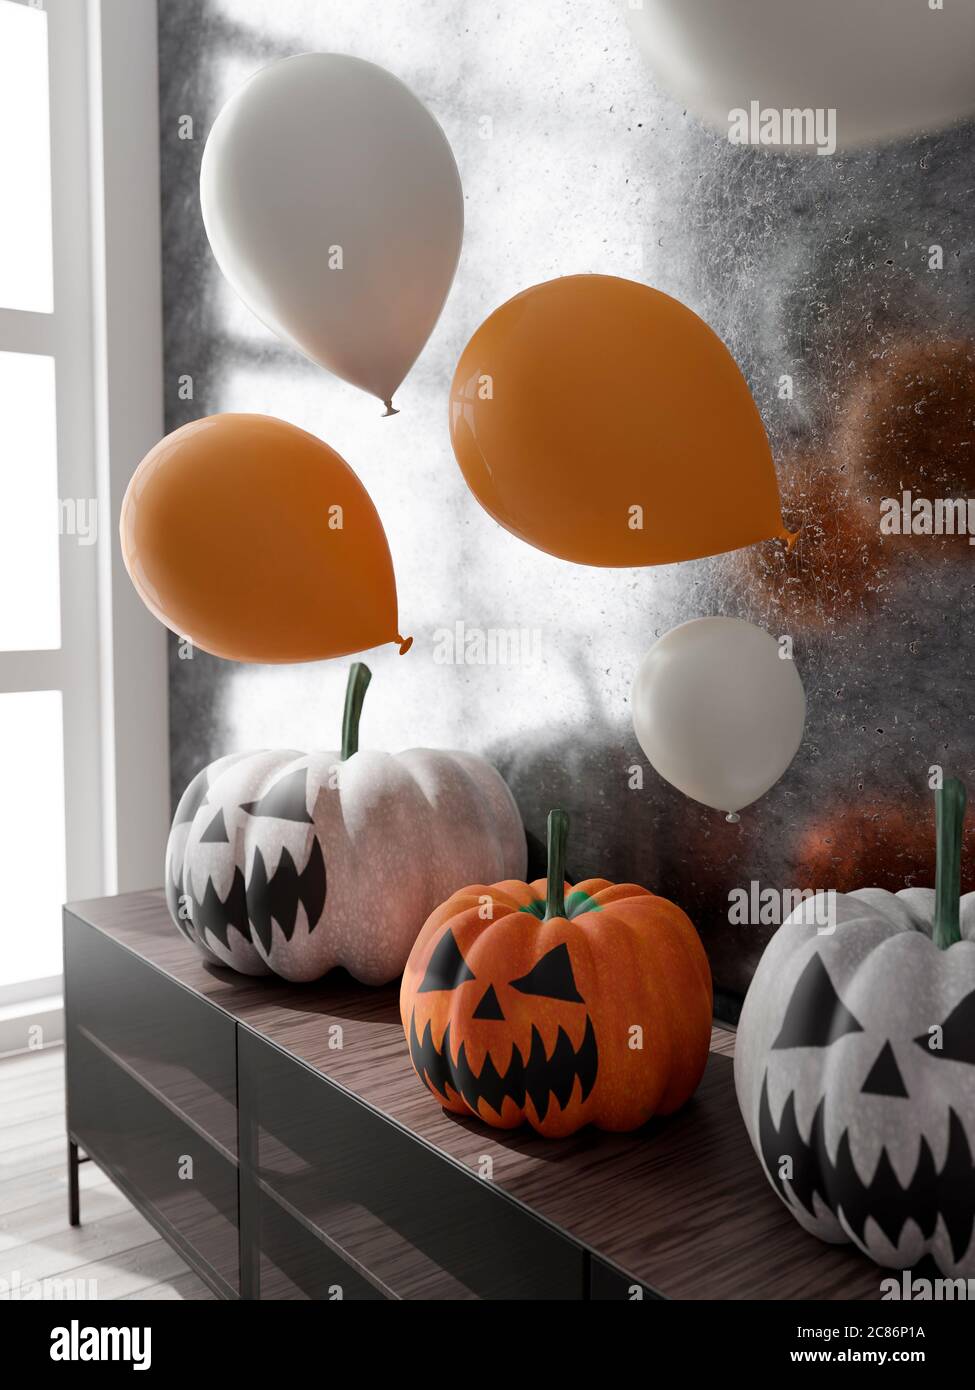 3D illustration of living room Halloween decoration. Pumpkins and balloons. 3D rendering Stock Photo